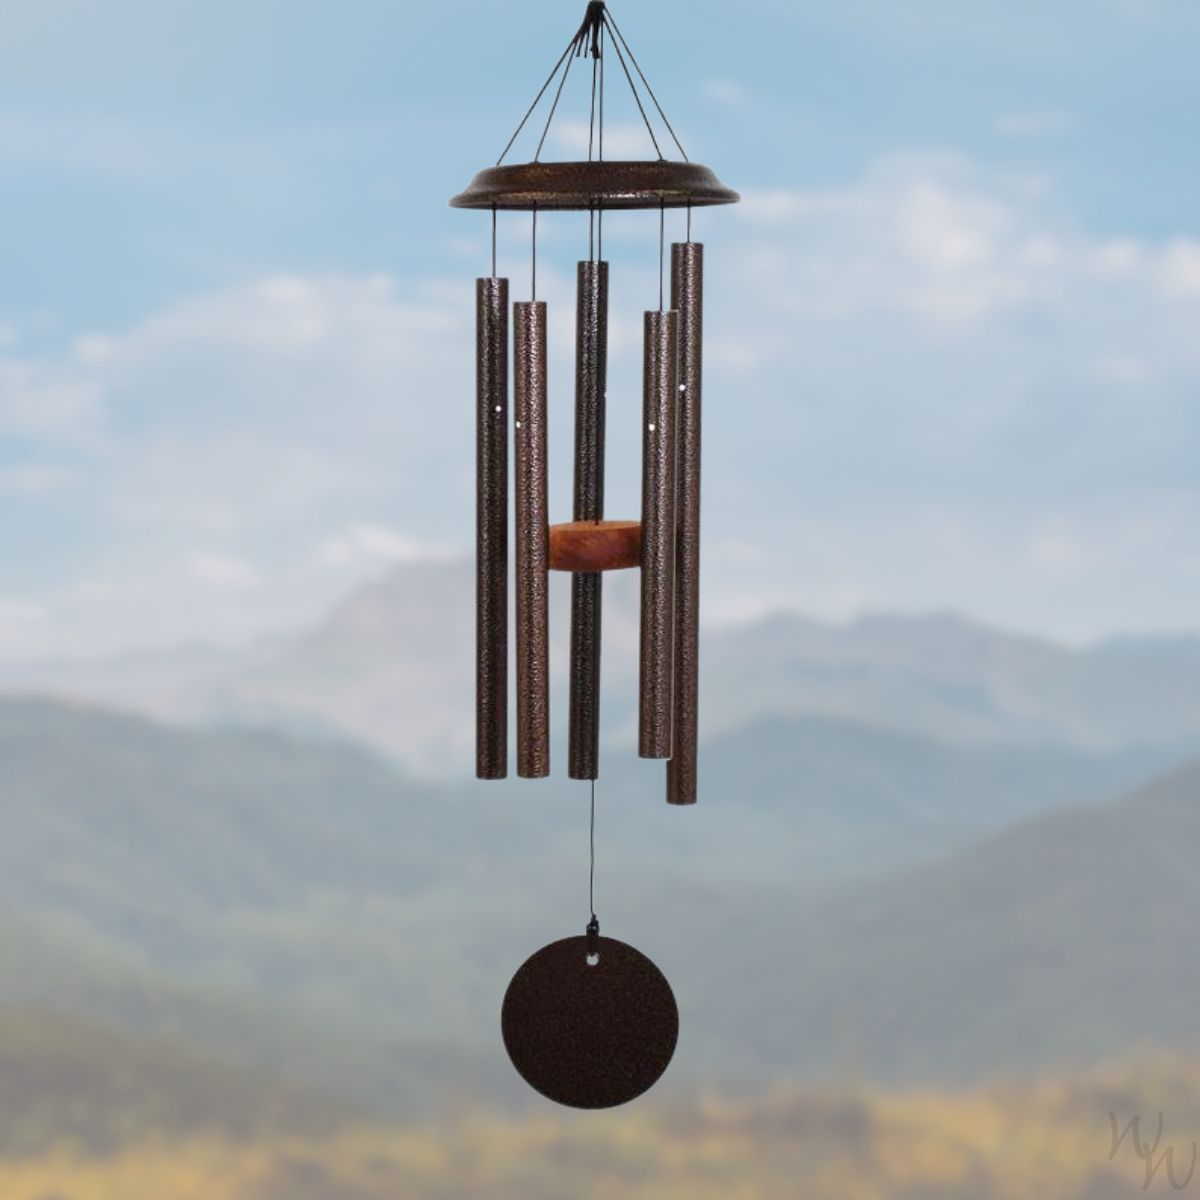 Shenandoah Melodies 26 Inch Copper Vein Wind Chime - Scale Of C